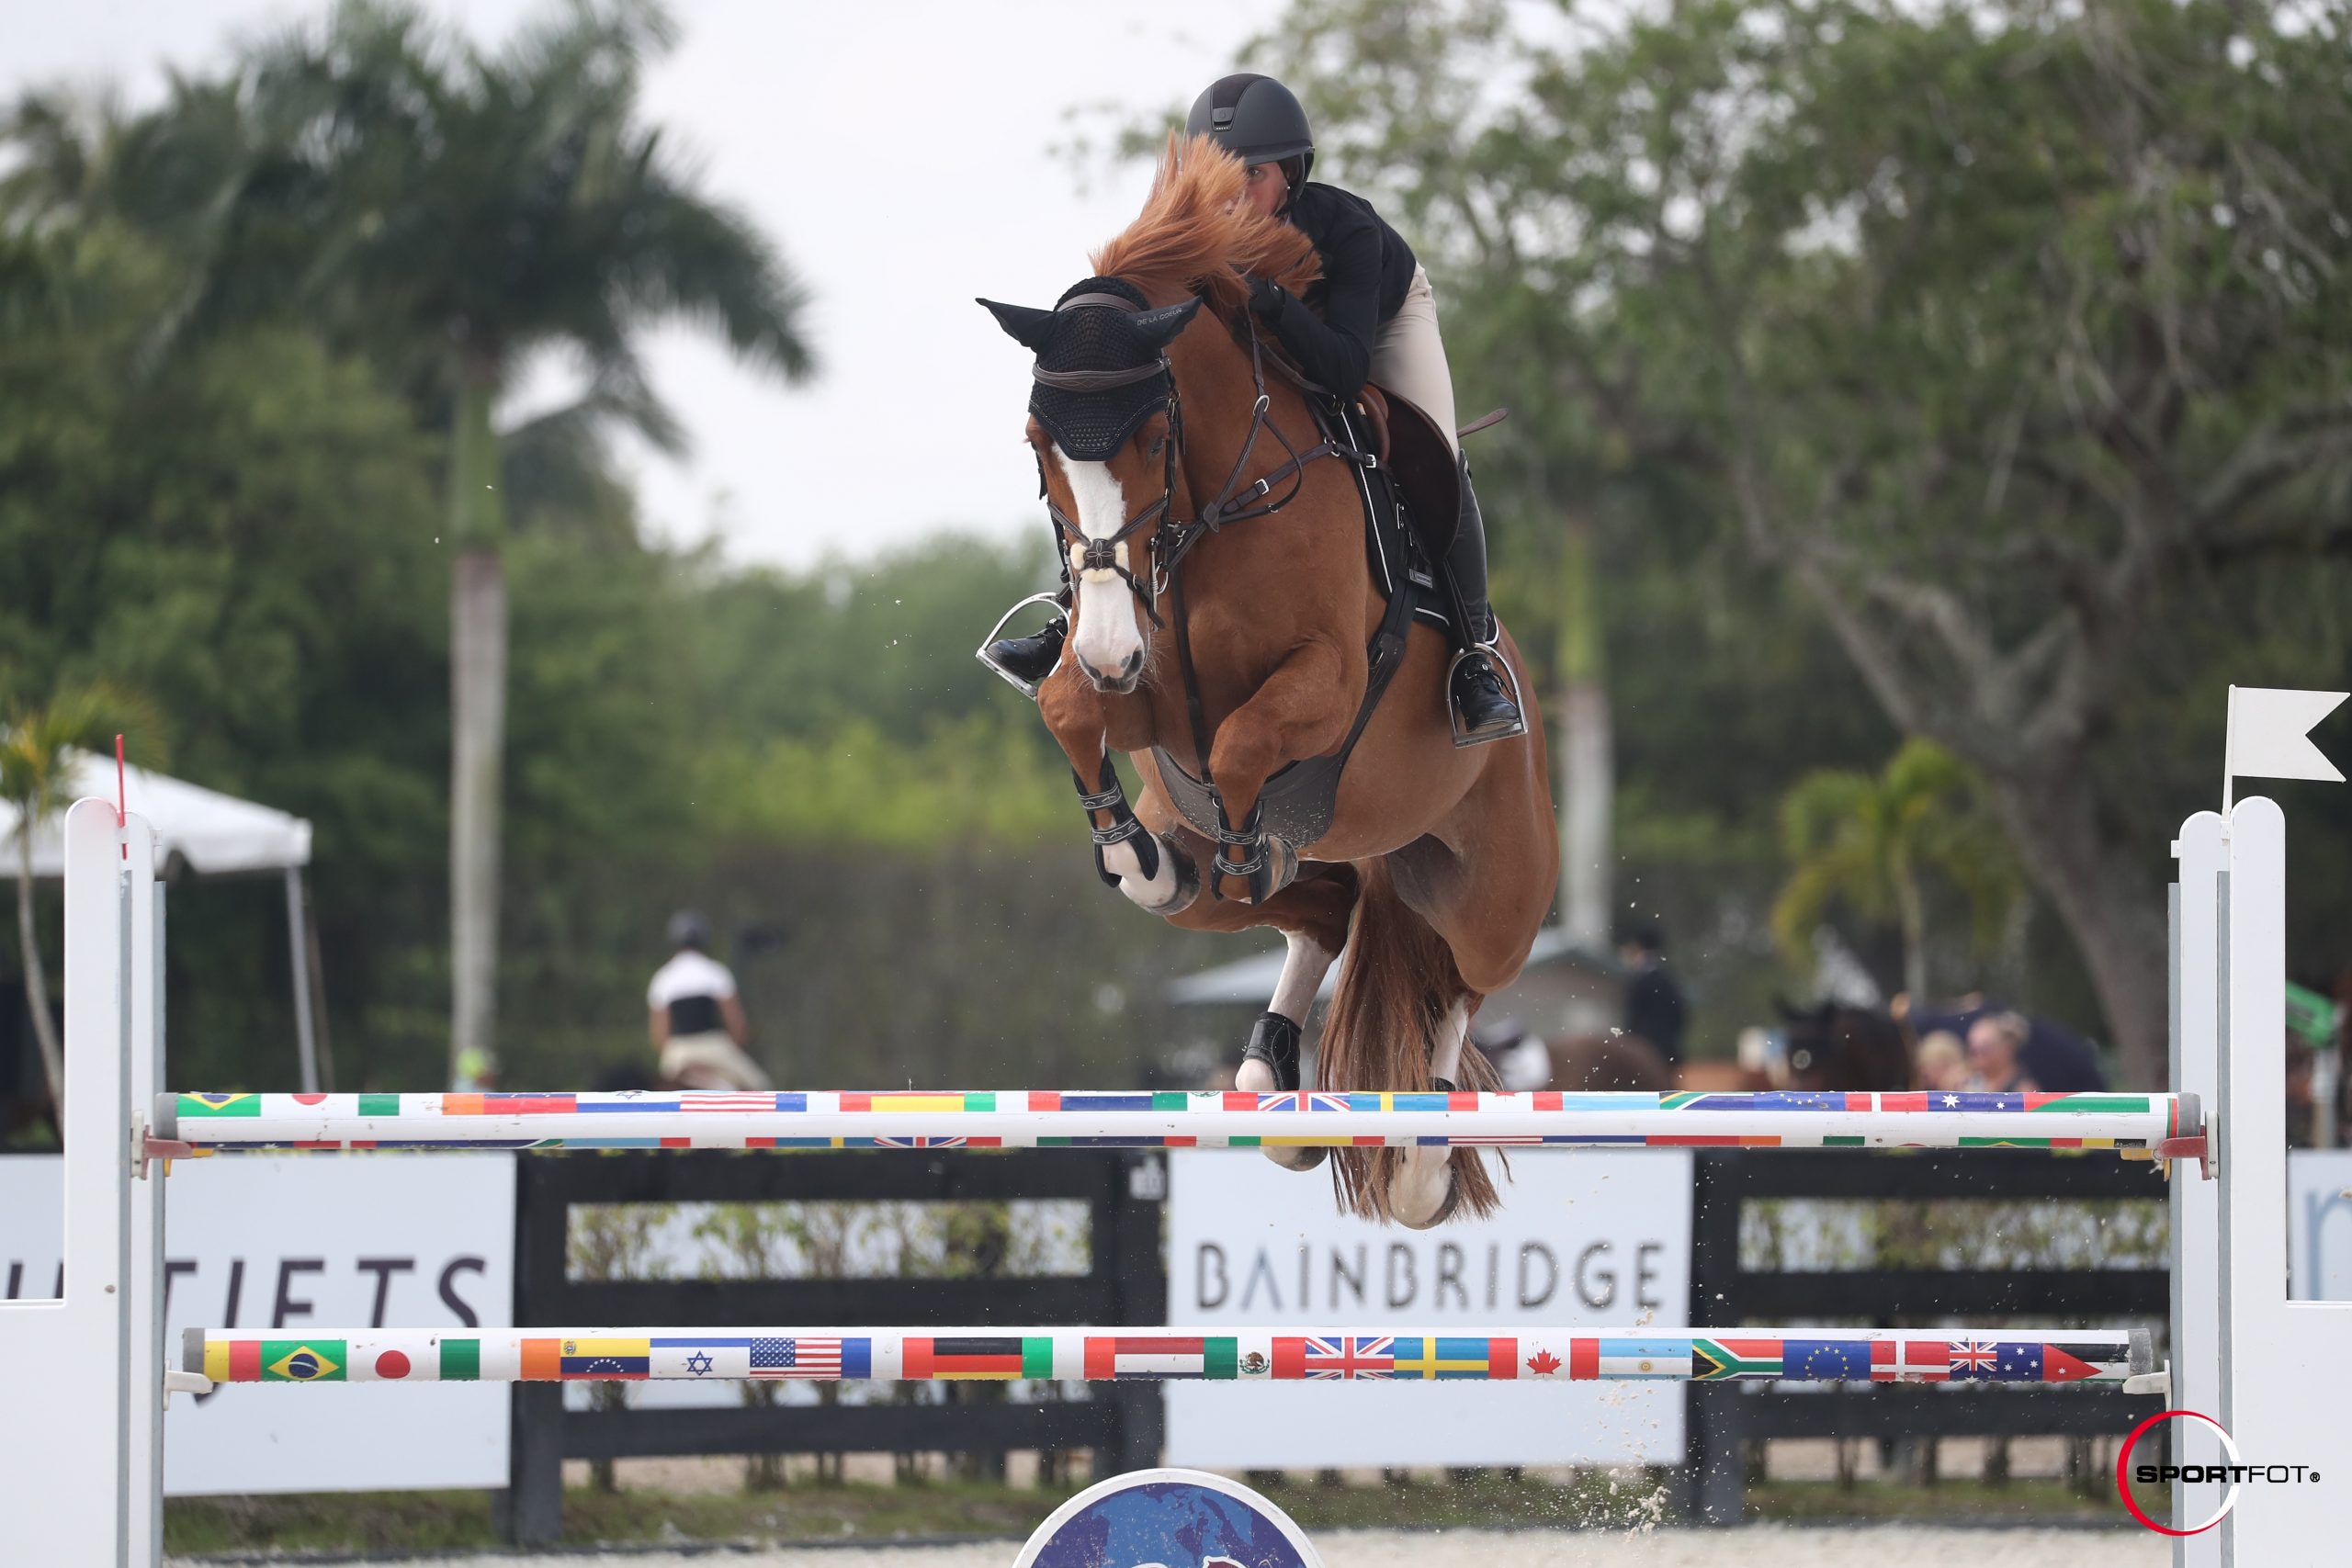 4th place for Jakilly and Taylor St. Jacques in the Cabana Coast 1.35m class!